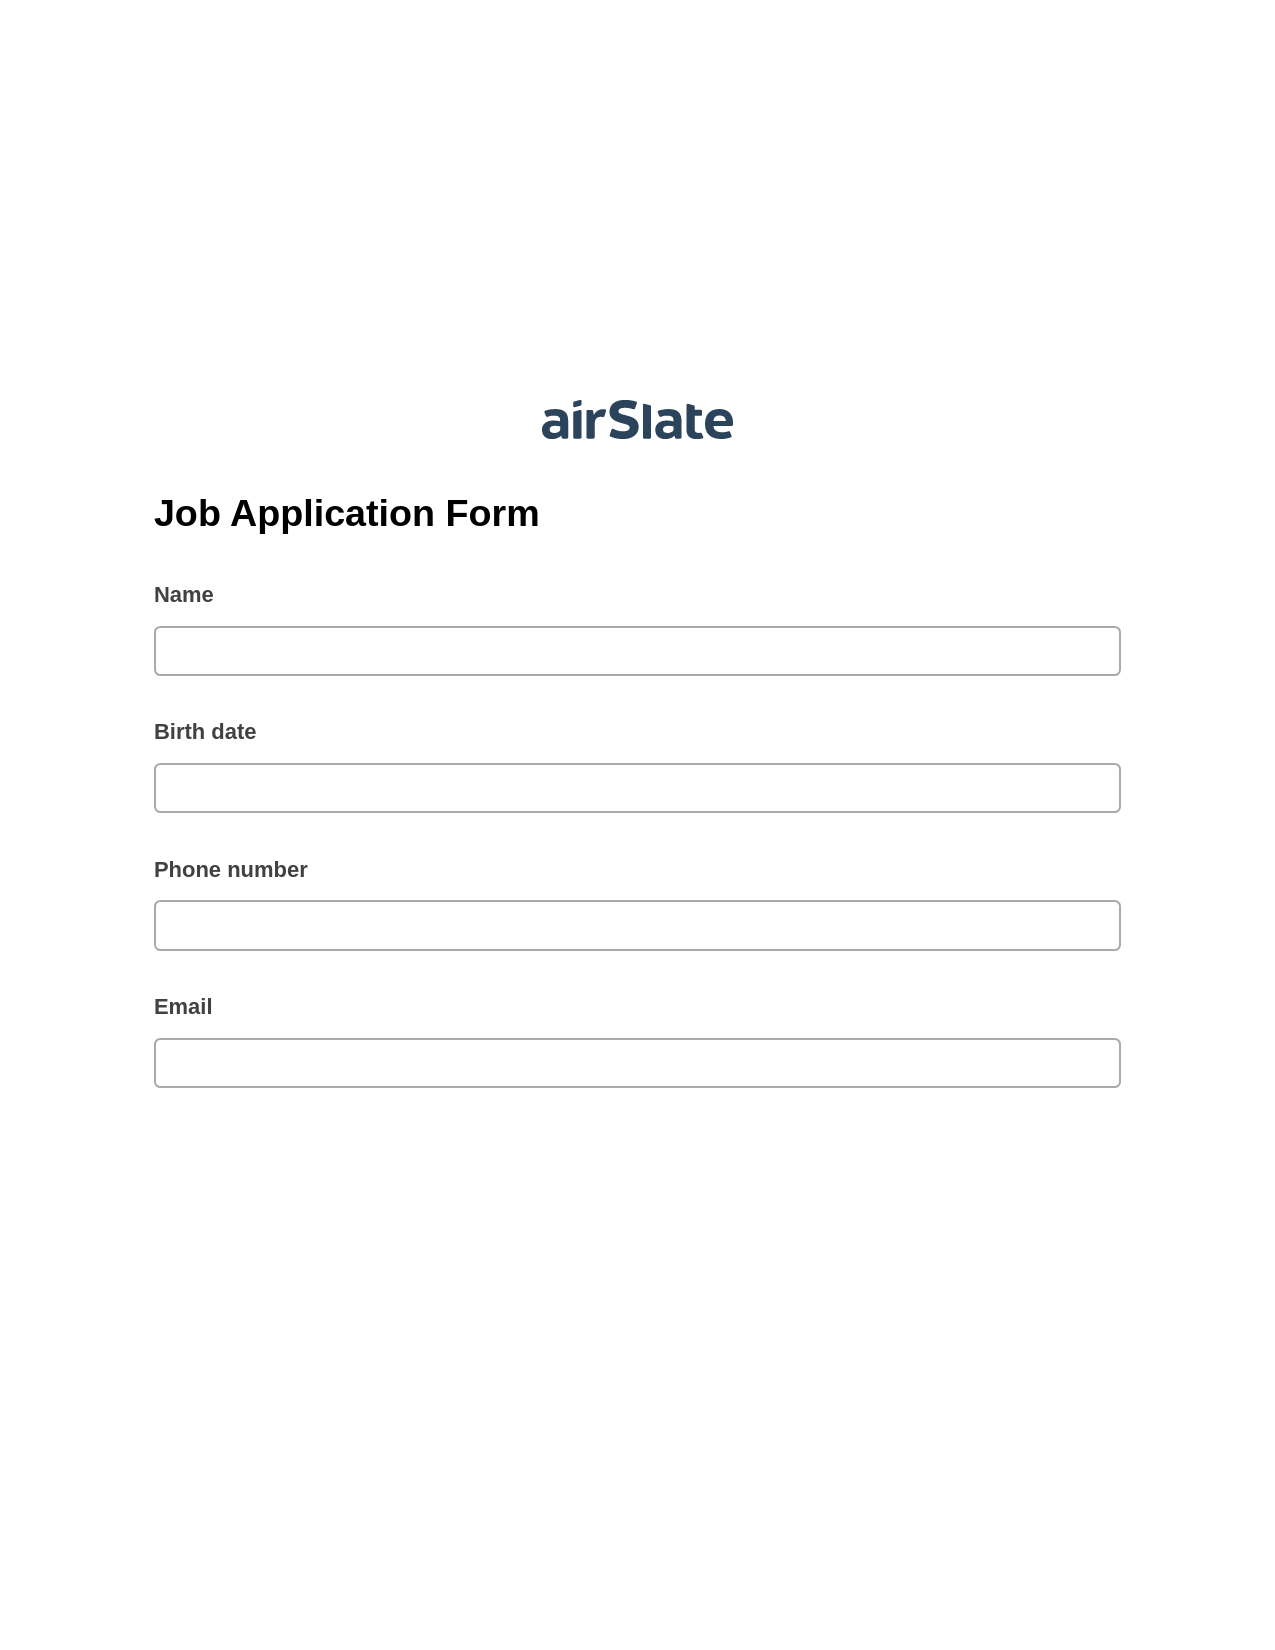 Multirole Job Application Form Pre-fill from Excel Spreadsheet Bot, Email Notification Bot, Box Bot